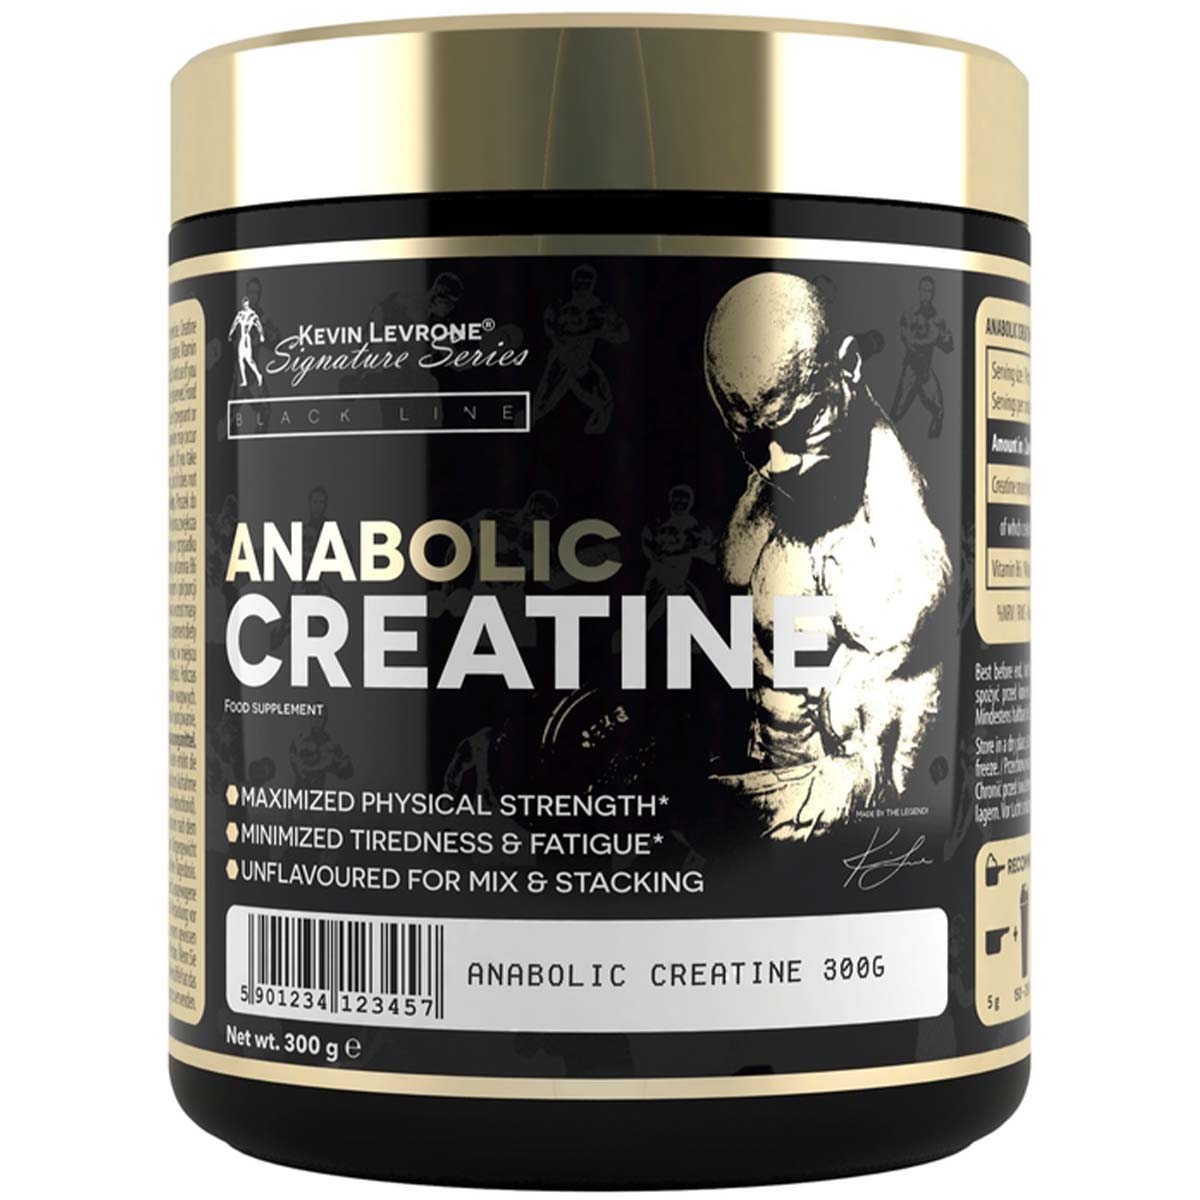 Kevin Levrone Anabolic Creatine, Unflavored, 300 Gm